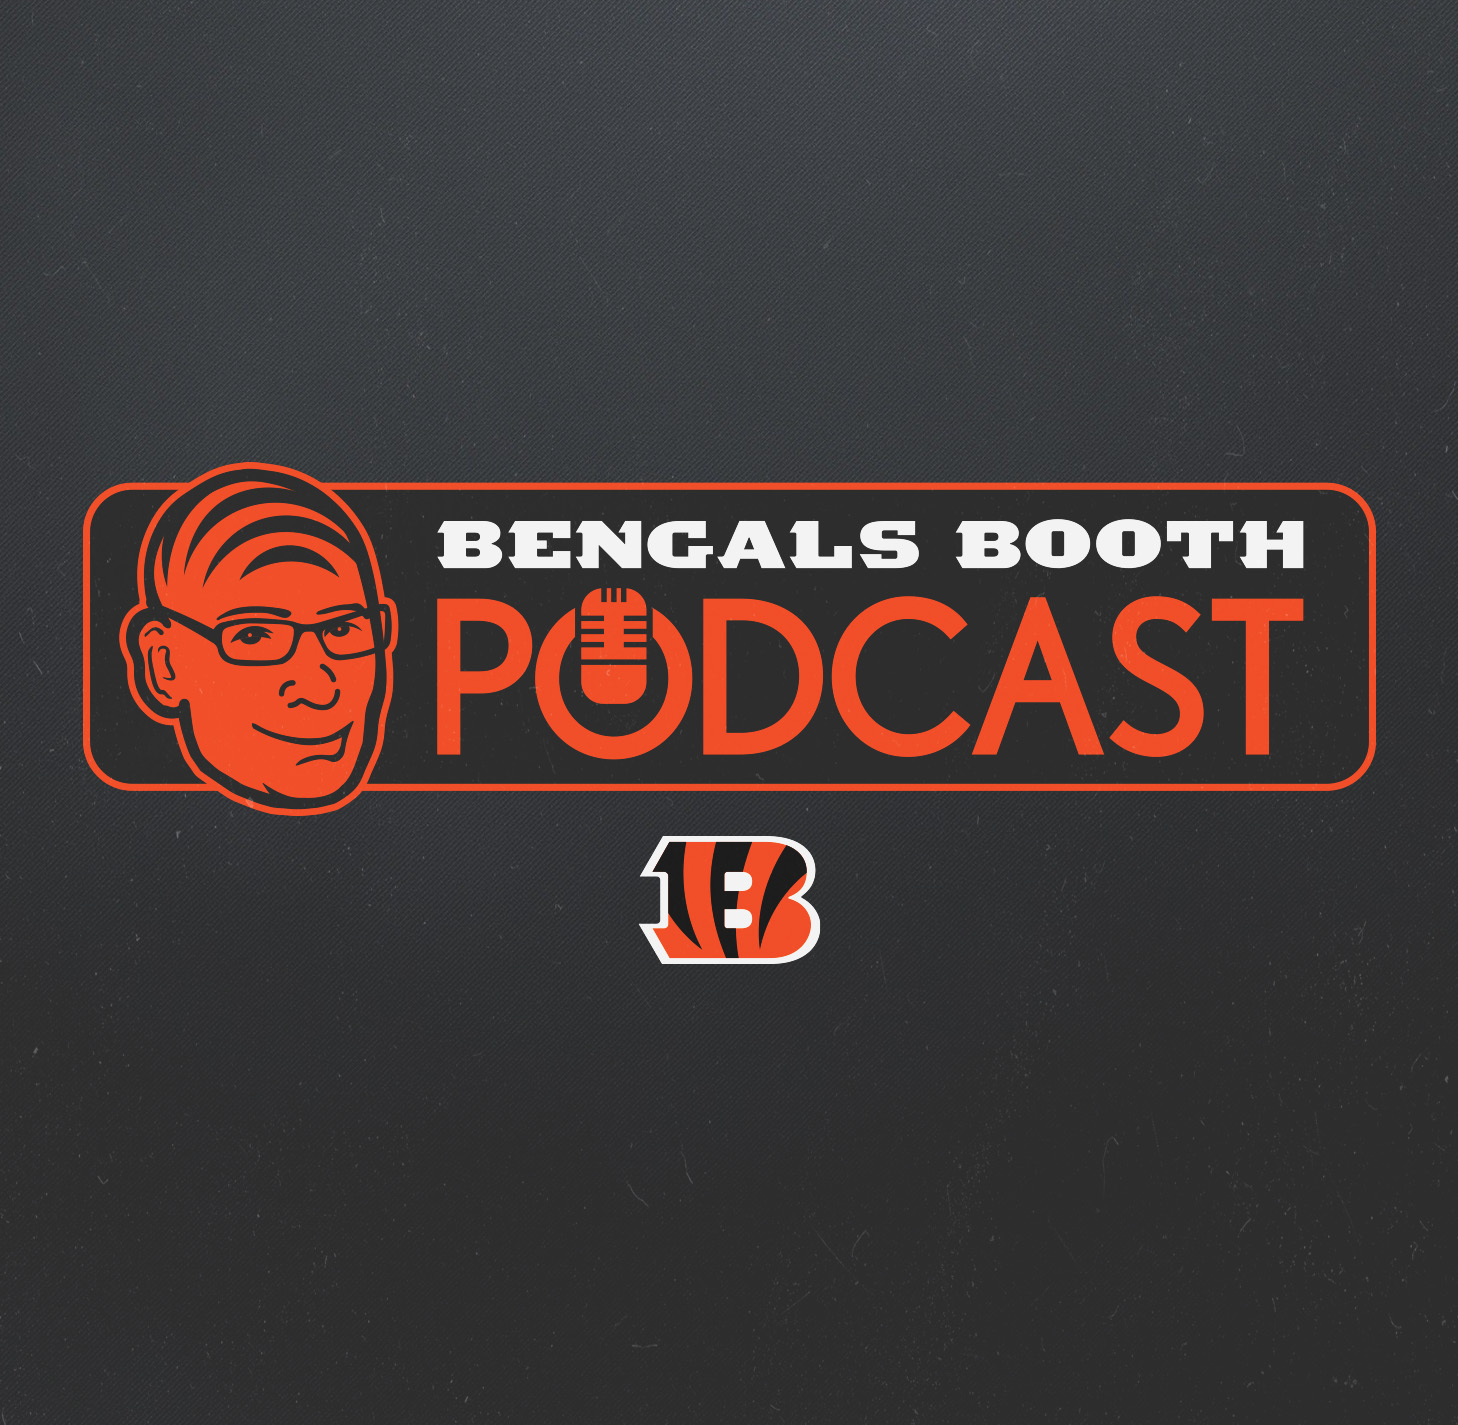 Bengals Booth Podcast: All I Need To Know